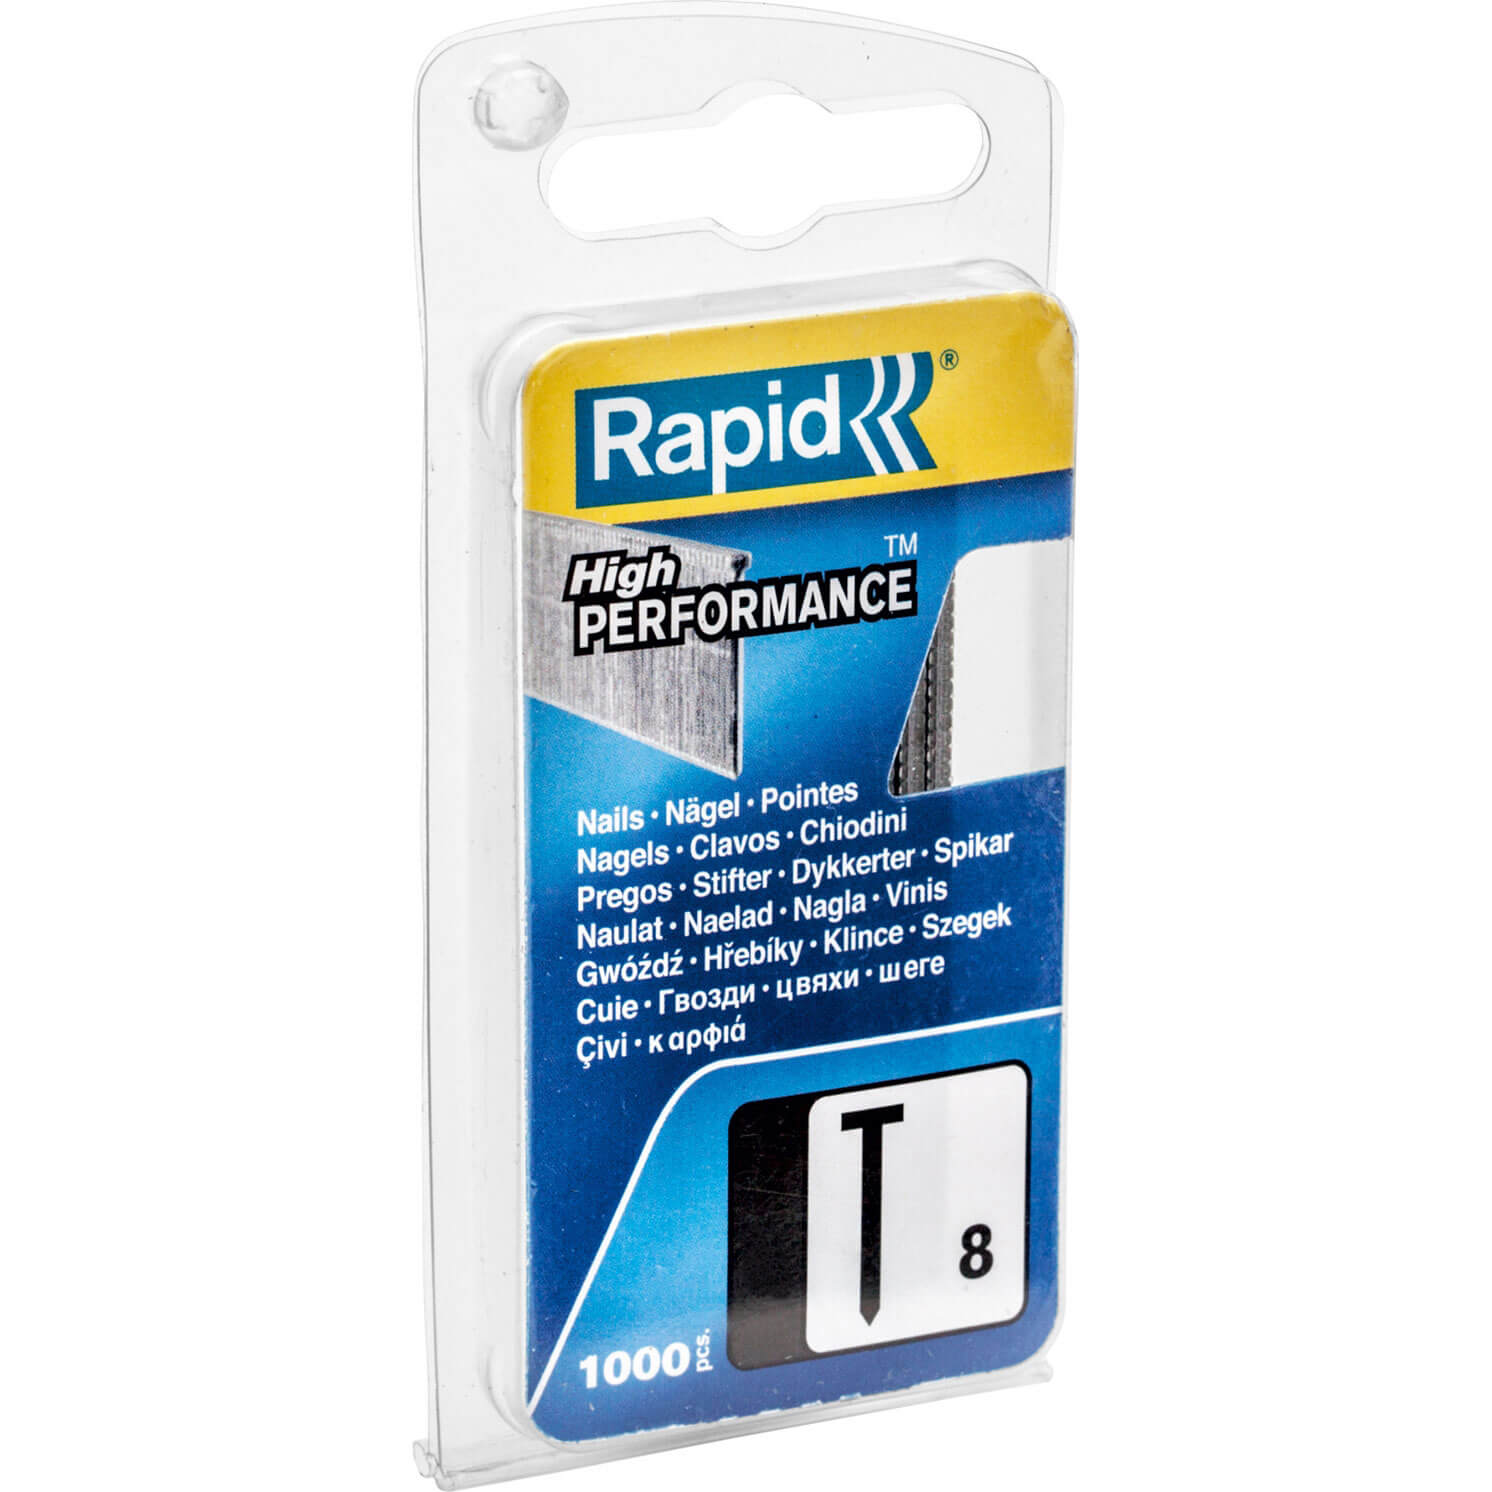 Image of Rapid Type 300 Brad Nails 25mm Pack of 1000